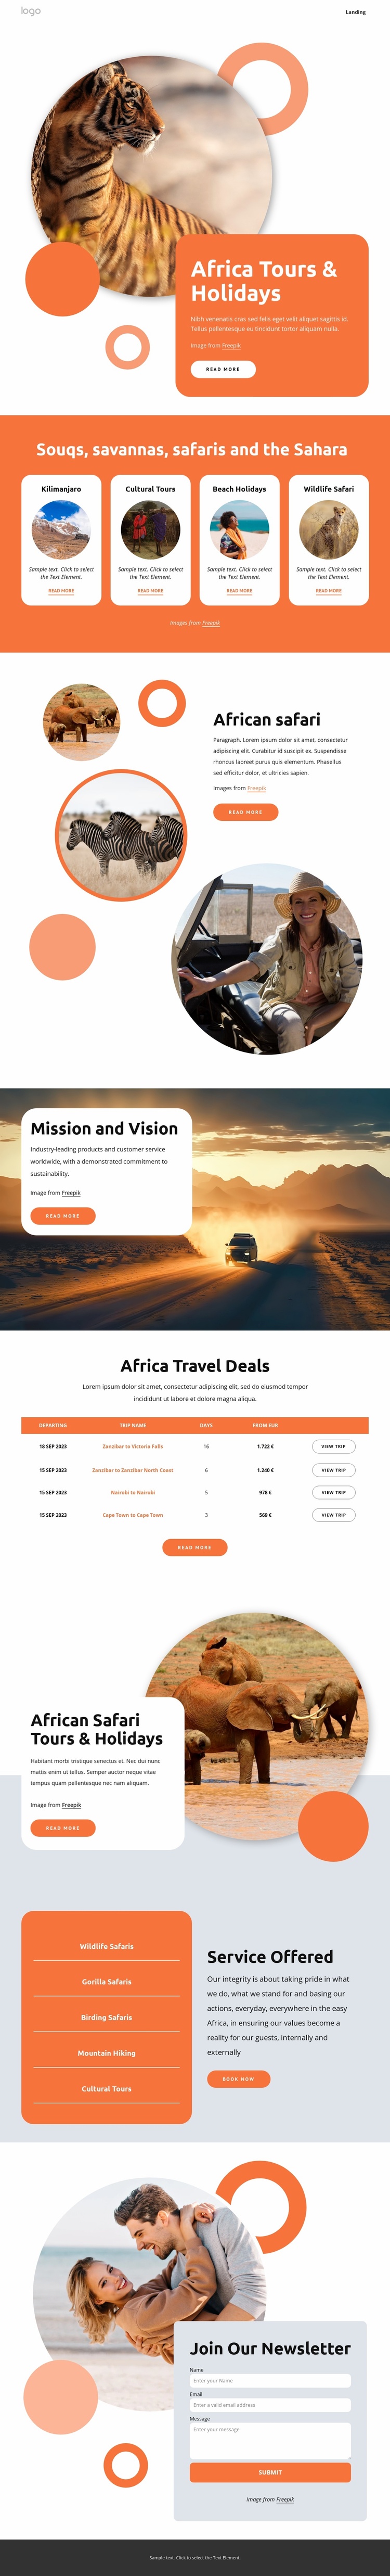 Africa tours and holidays Website Template